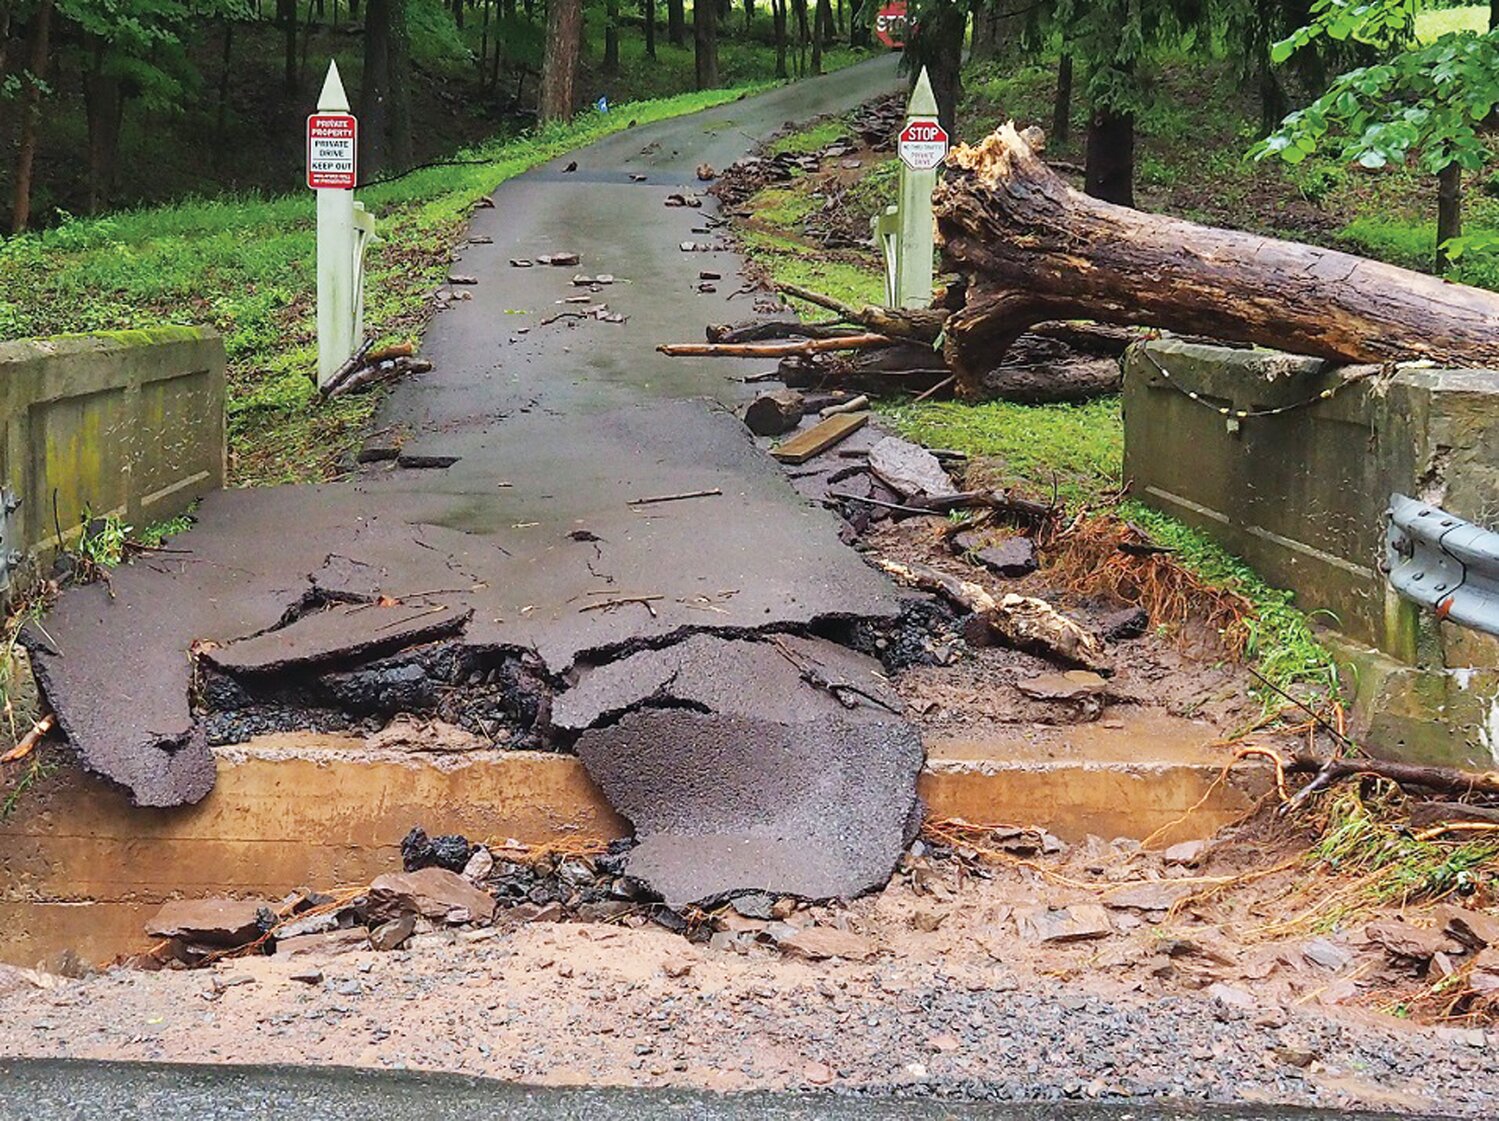 This weekend storm and flood downed a tree and damaged the driveway of an Upper Makefield residence.